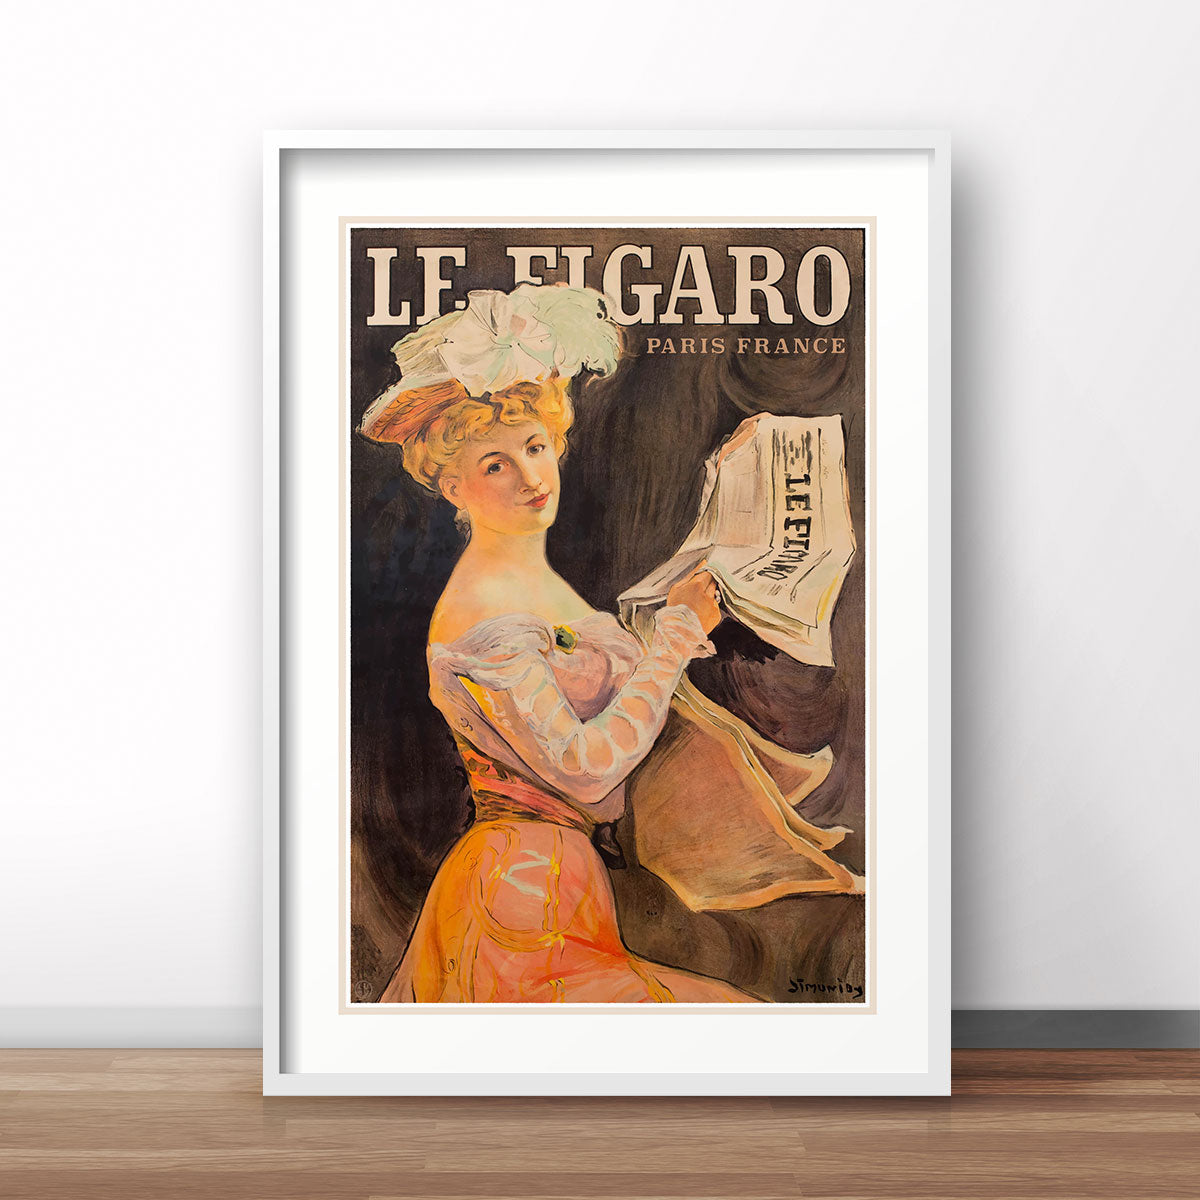 Le Figaro France reto vintage advertising poster print from Places We Luv